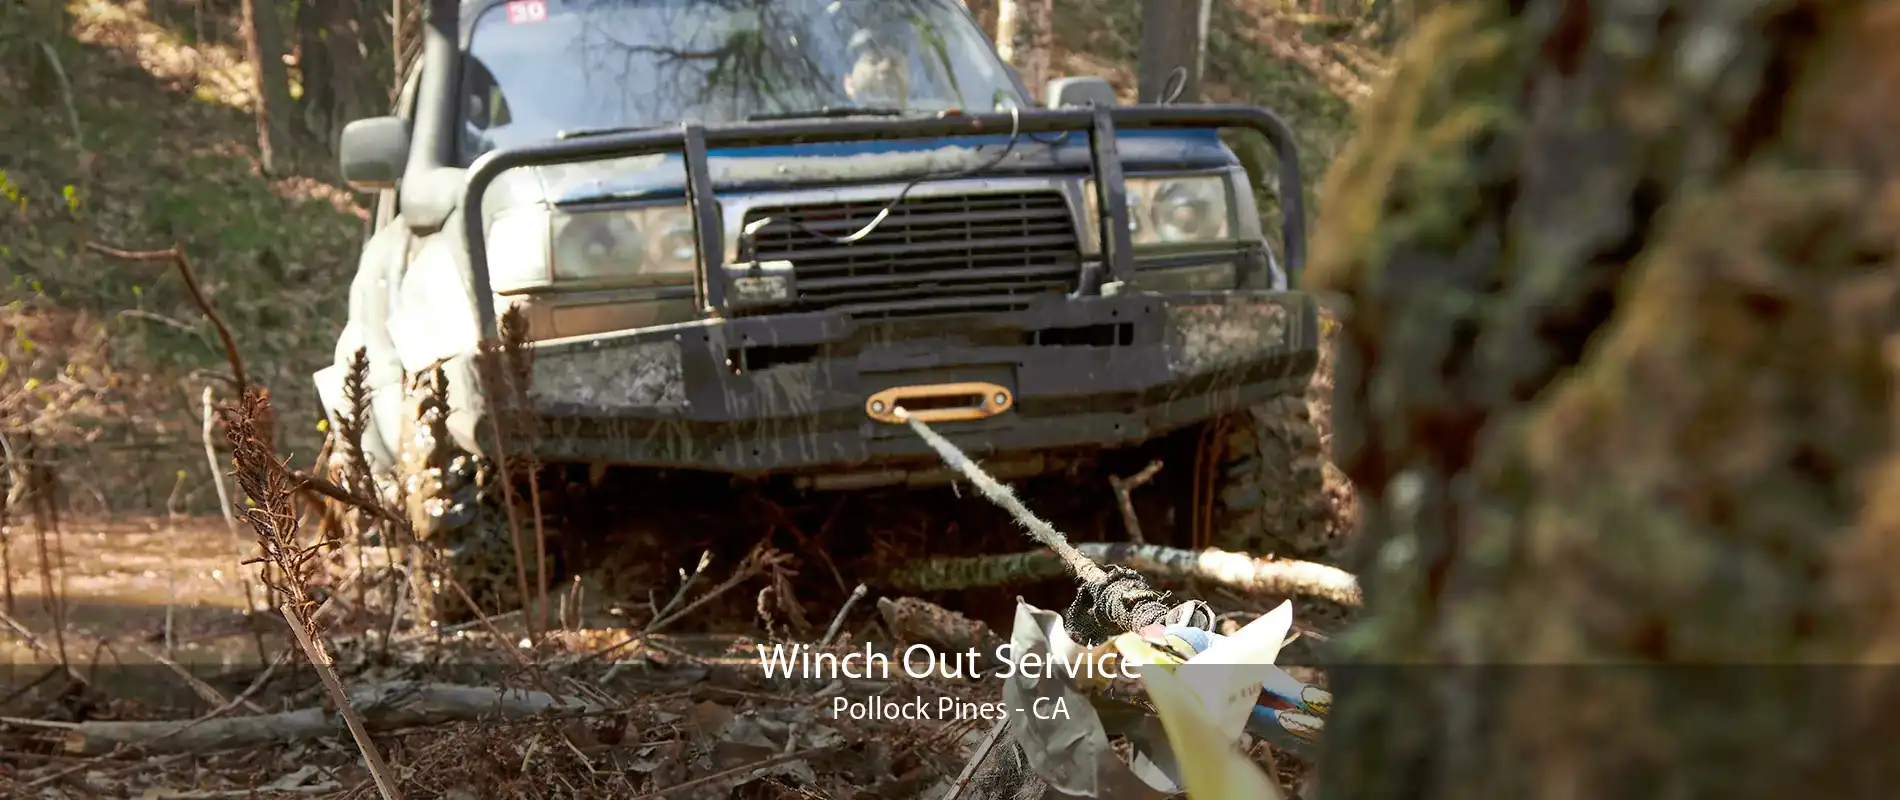 Winch Out Service Pollock Pines - CA